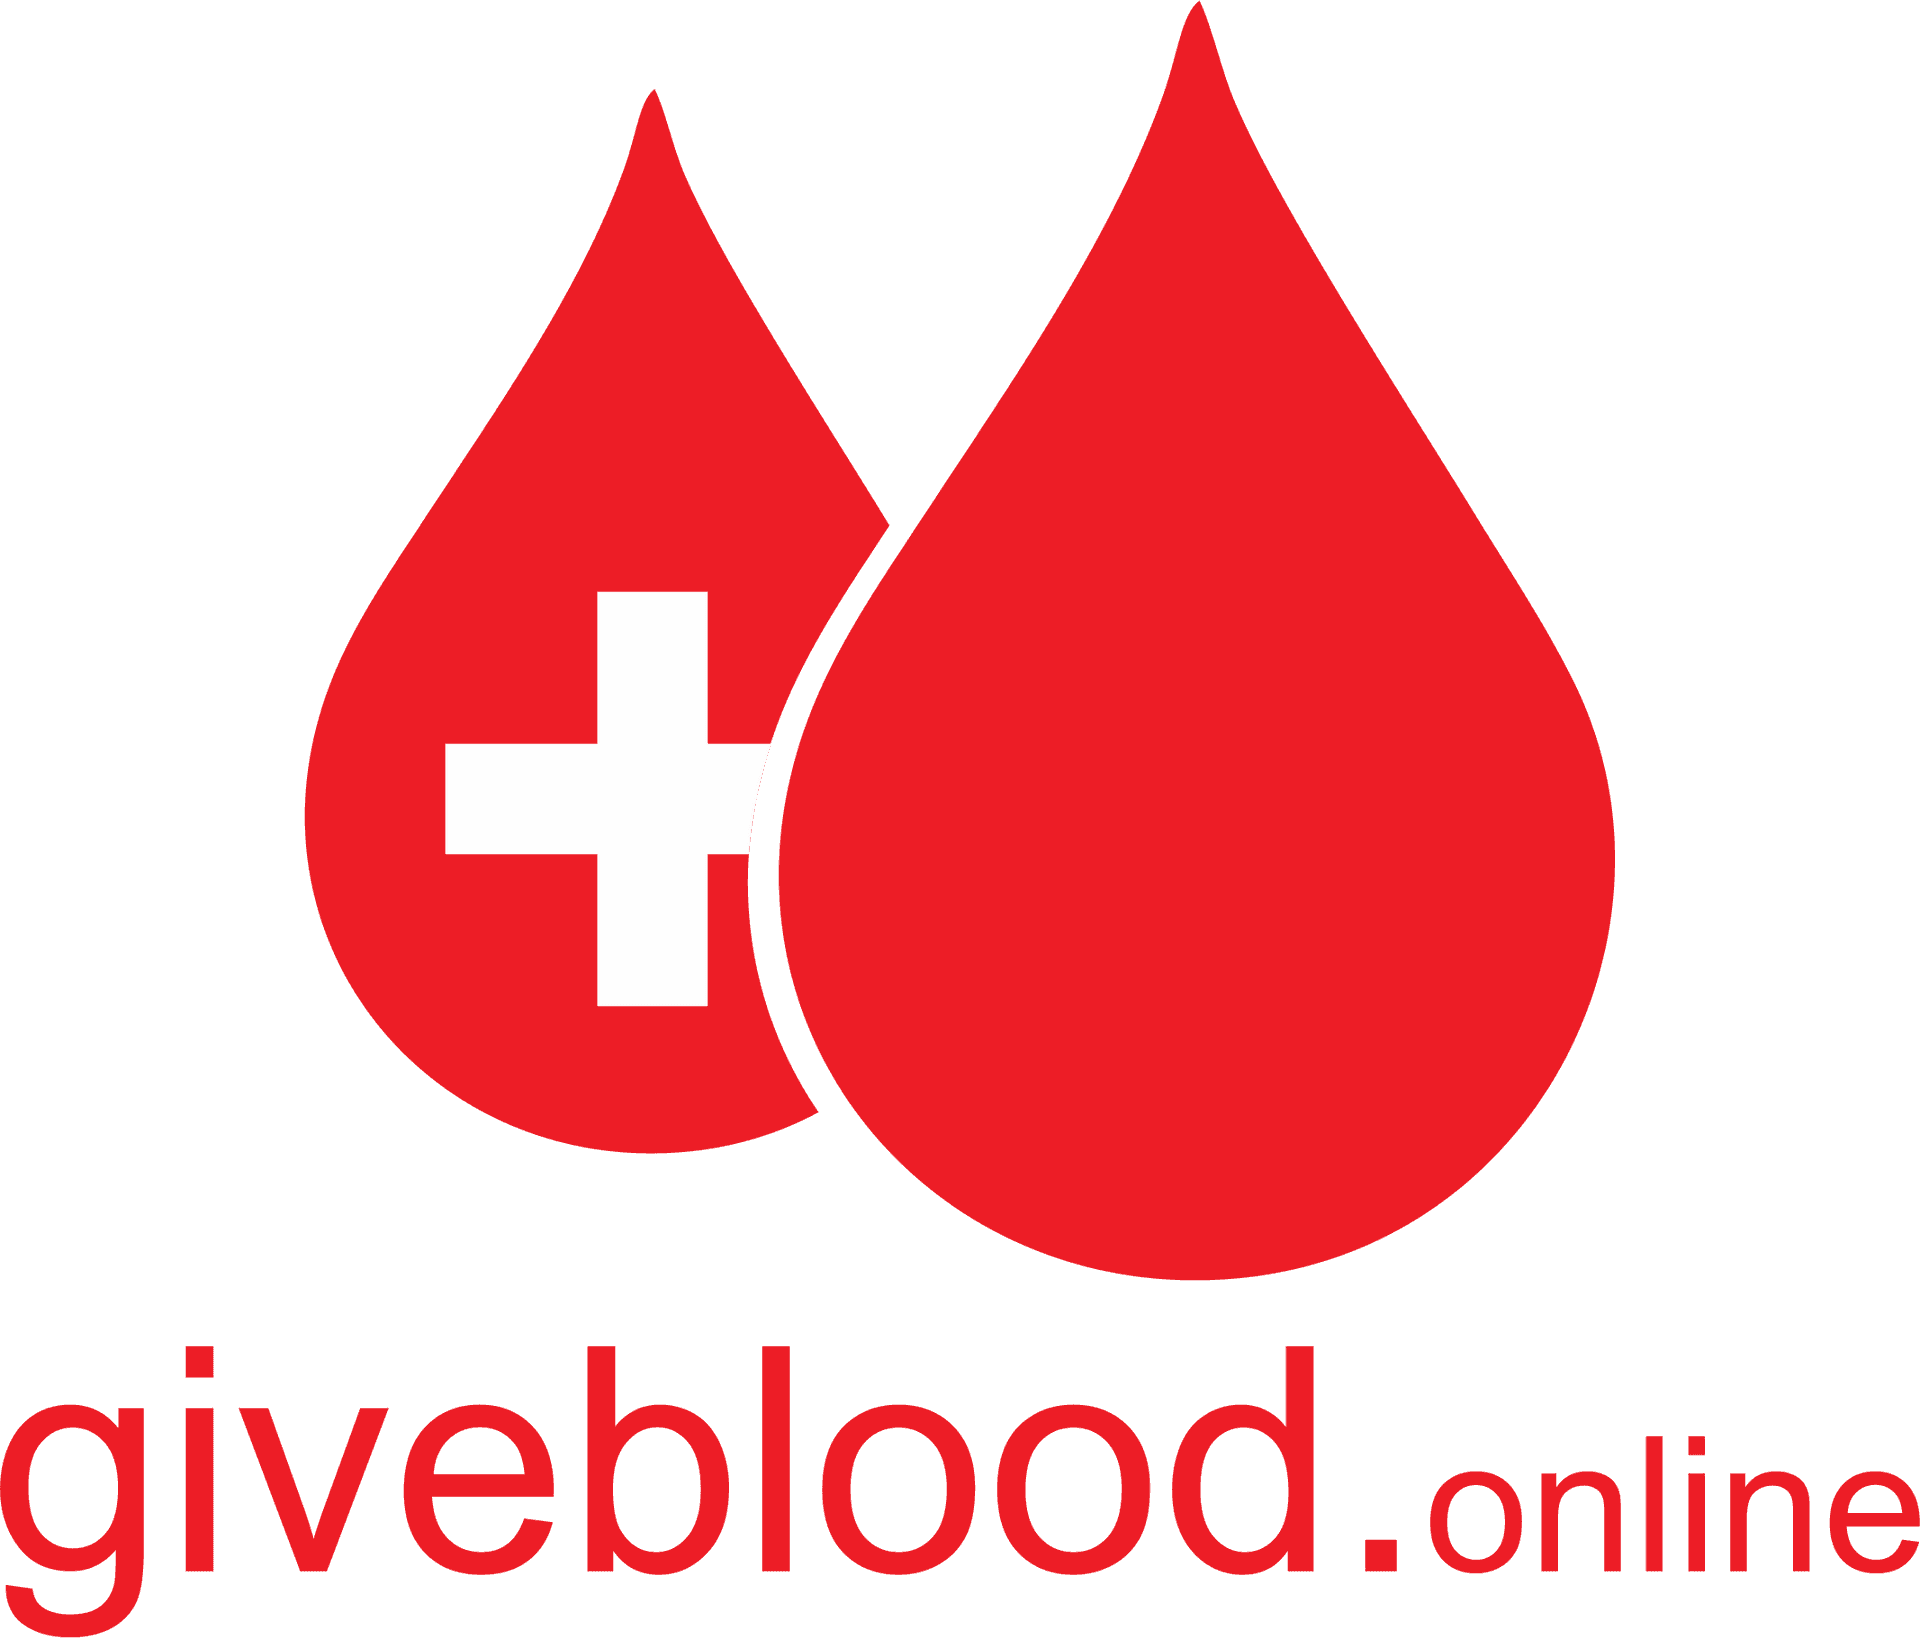 Blood Donation Online Campaign Graphic PNG